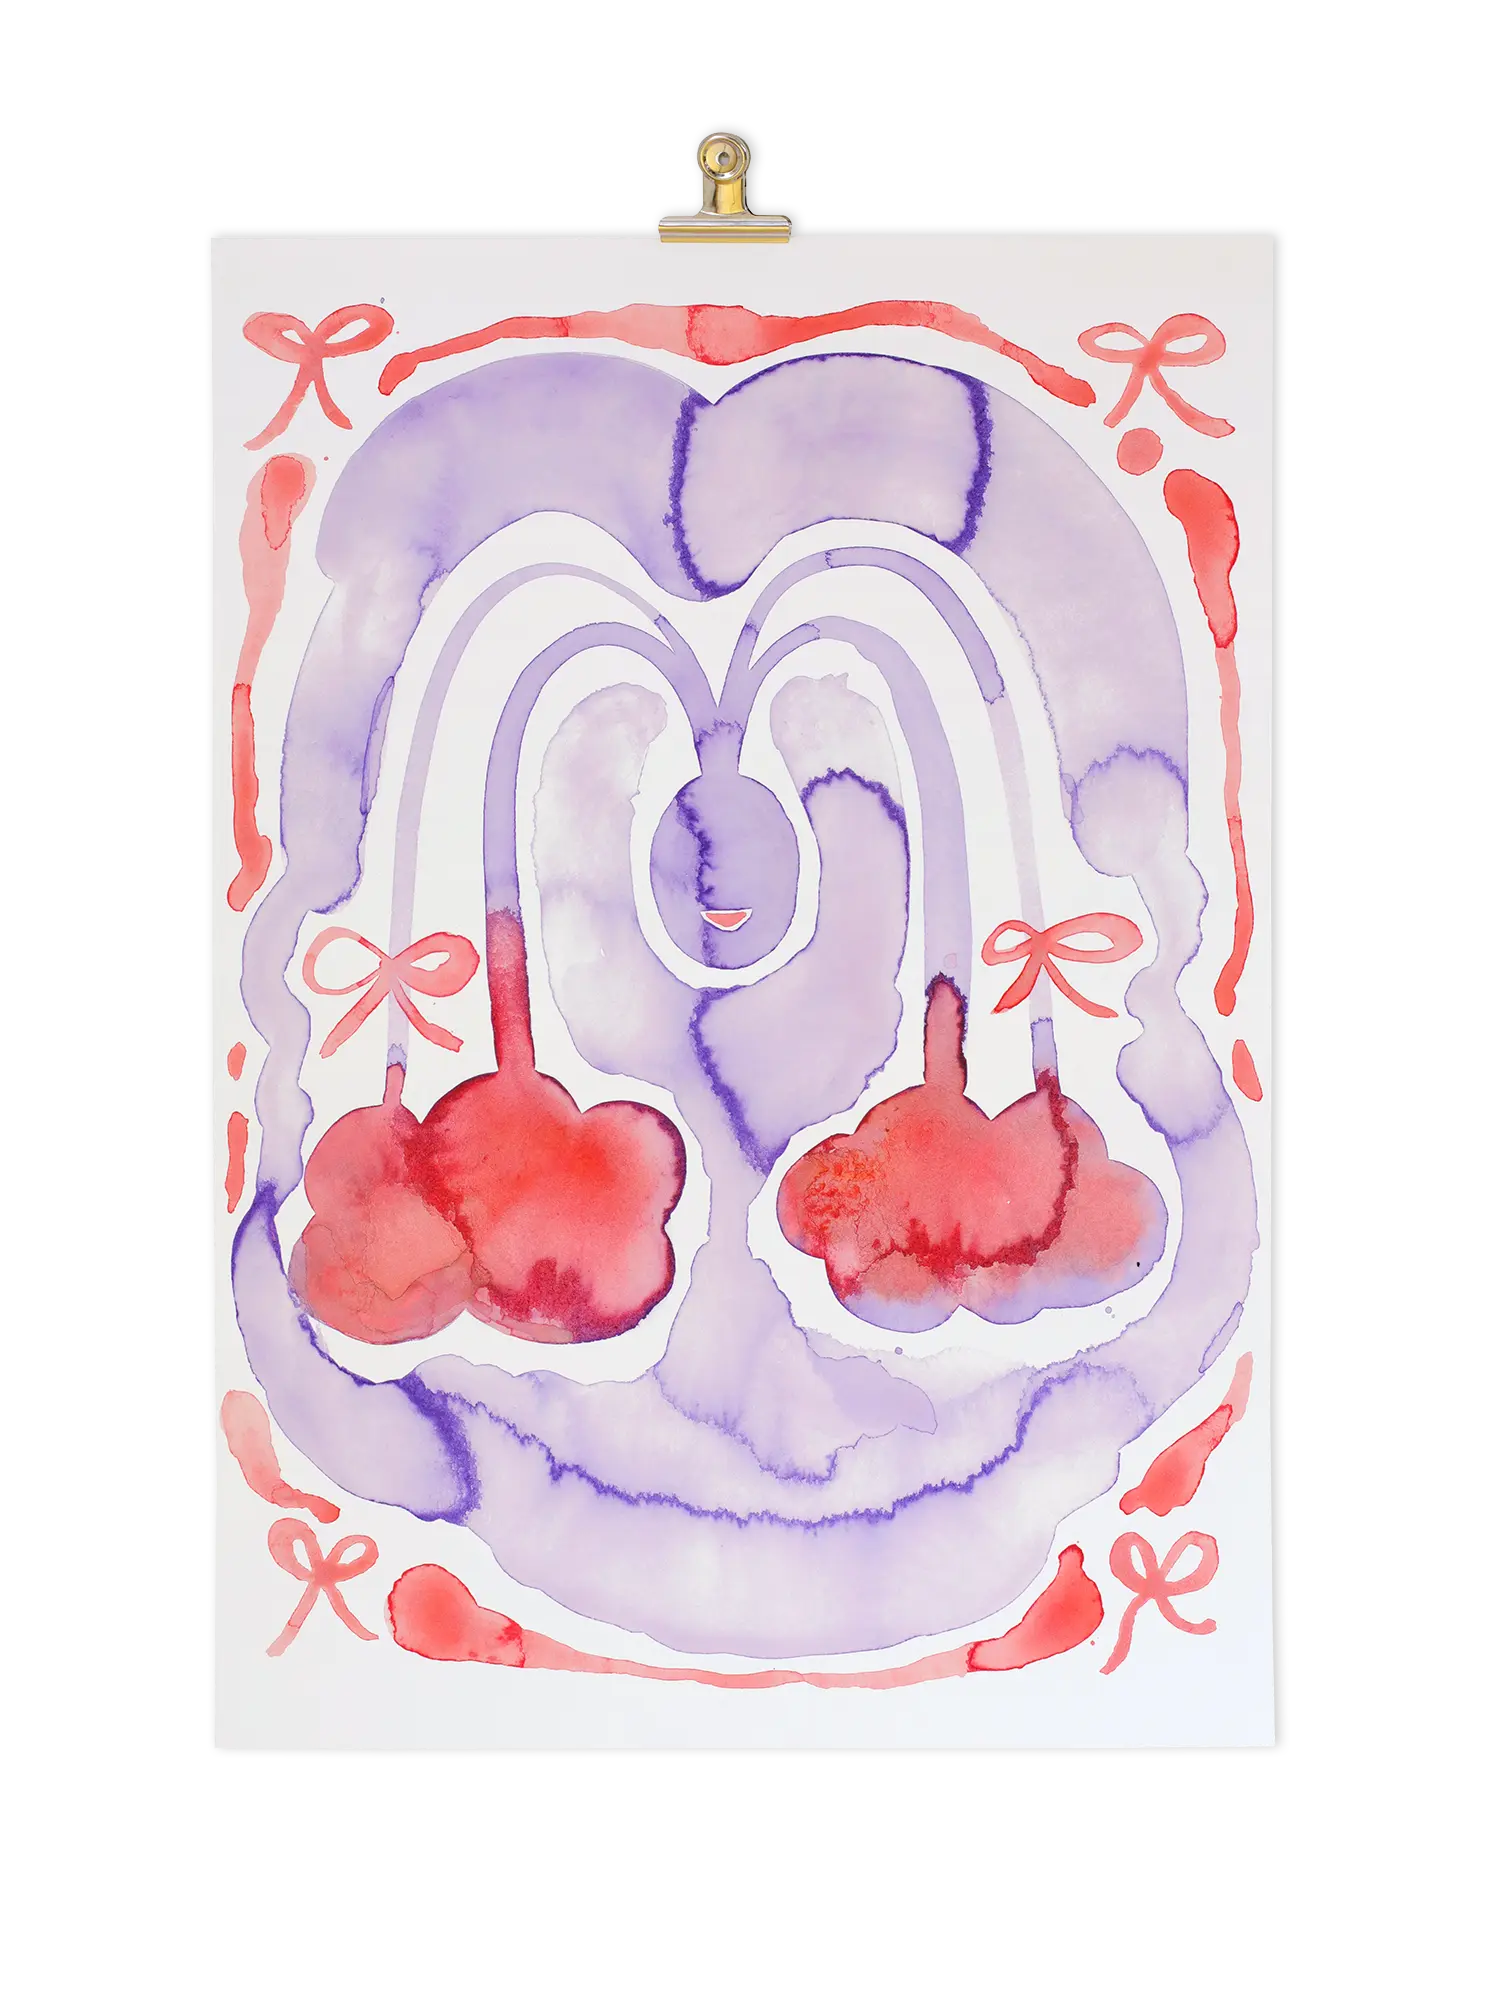 This Giclée print artwork explores the idea of landscape in its widest form: the landscape of the body. It is a celebration of feminine power, cycles of nature and eroticism in the everyday. Red, pink and purple watercolours with bows.